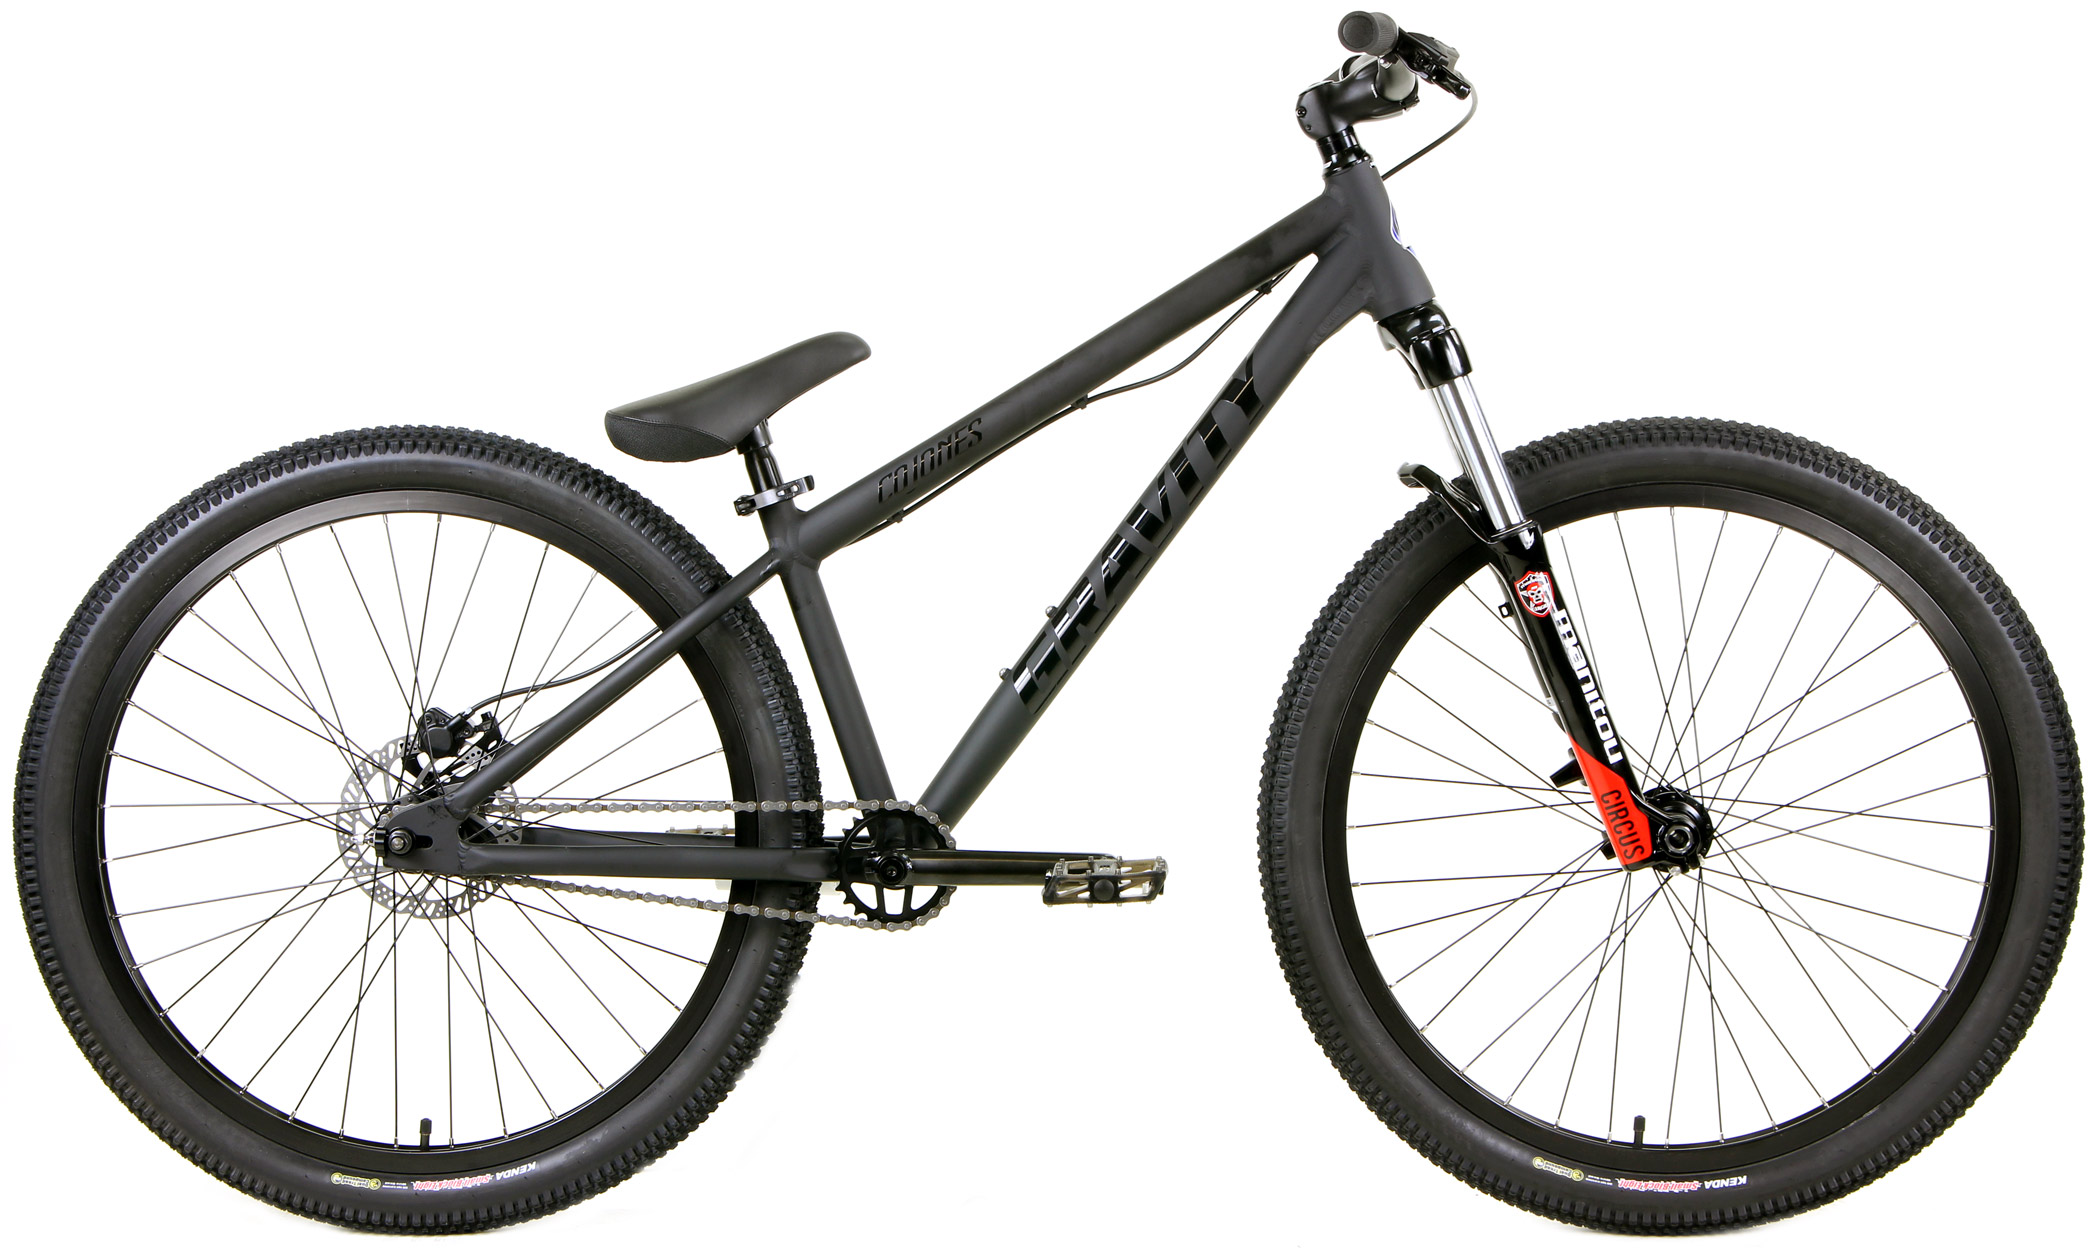 ten tweede Koe Omgeving Save up to 60% off new Adult BMX ALL BIKES FREE SHIP 48 Save Up to 60% Off  Gravity CoJones FLY Bicycles Dirt Jump Dirt Jump Bikes, BMX Cruiser Bikes